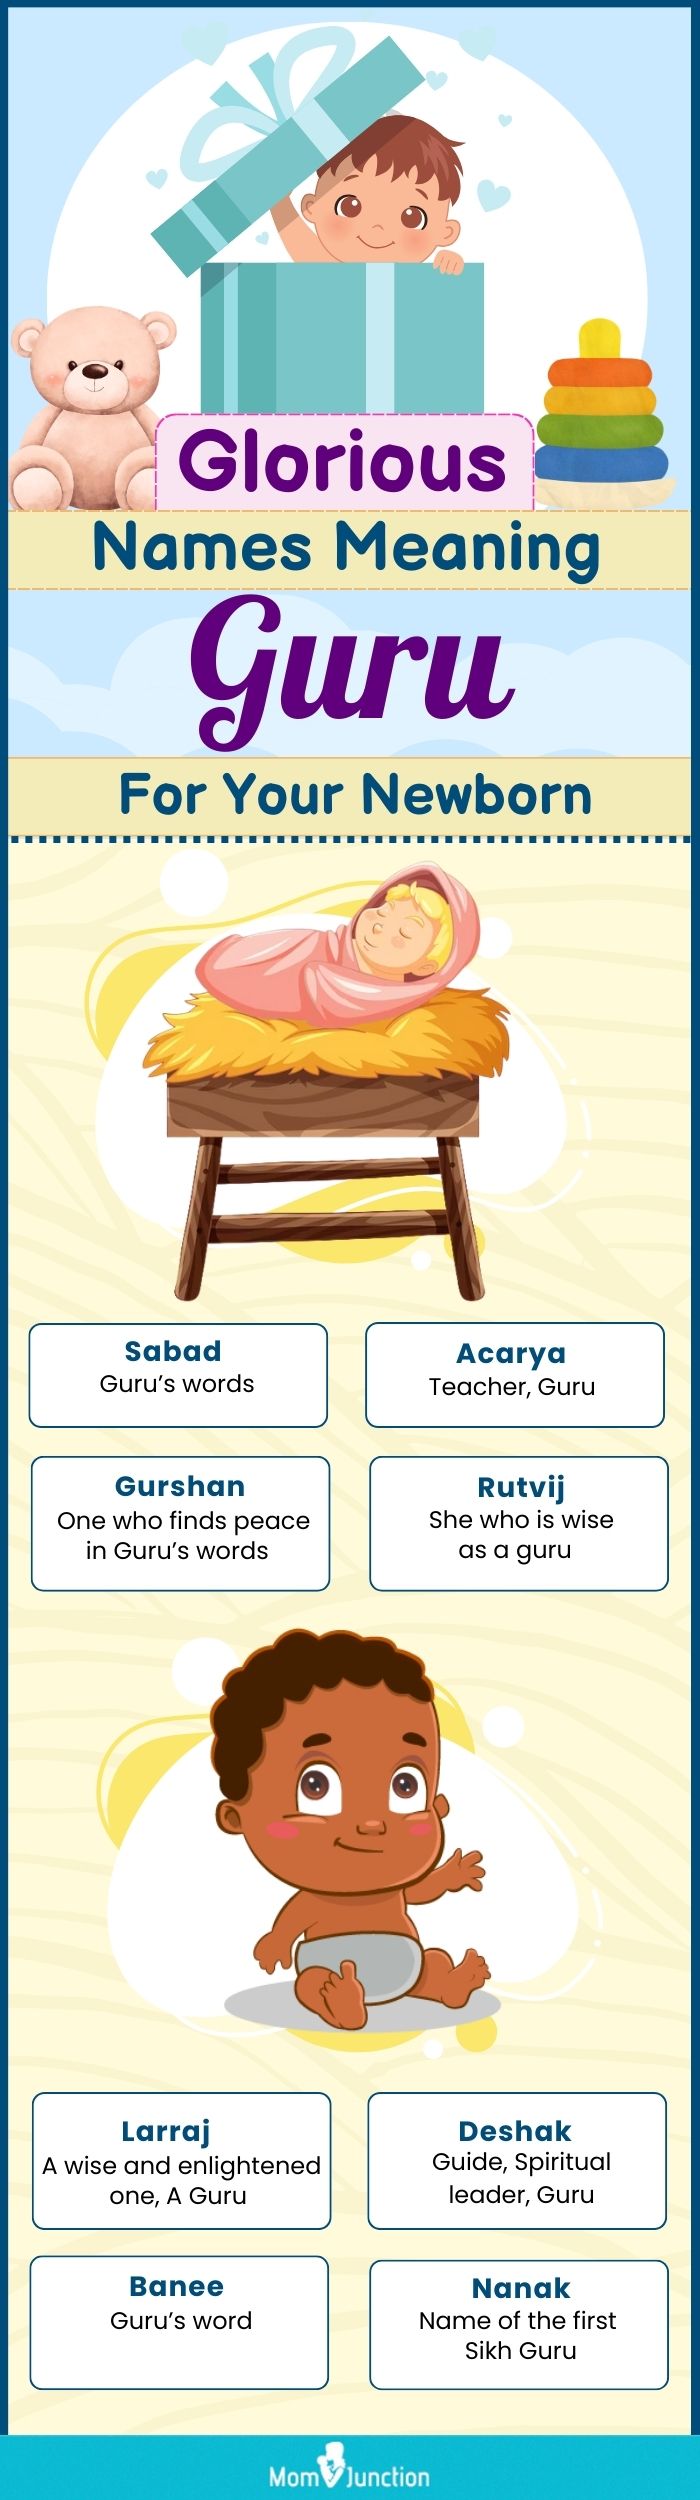 glorious names meaning guru for your newborn (infographic)